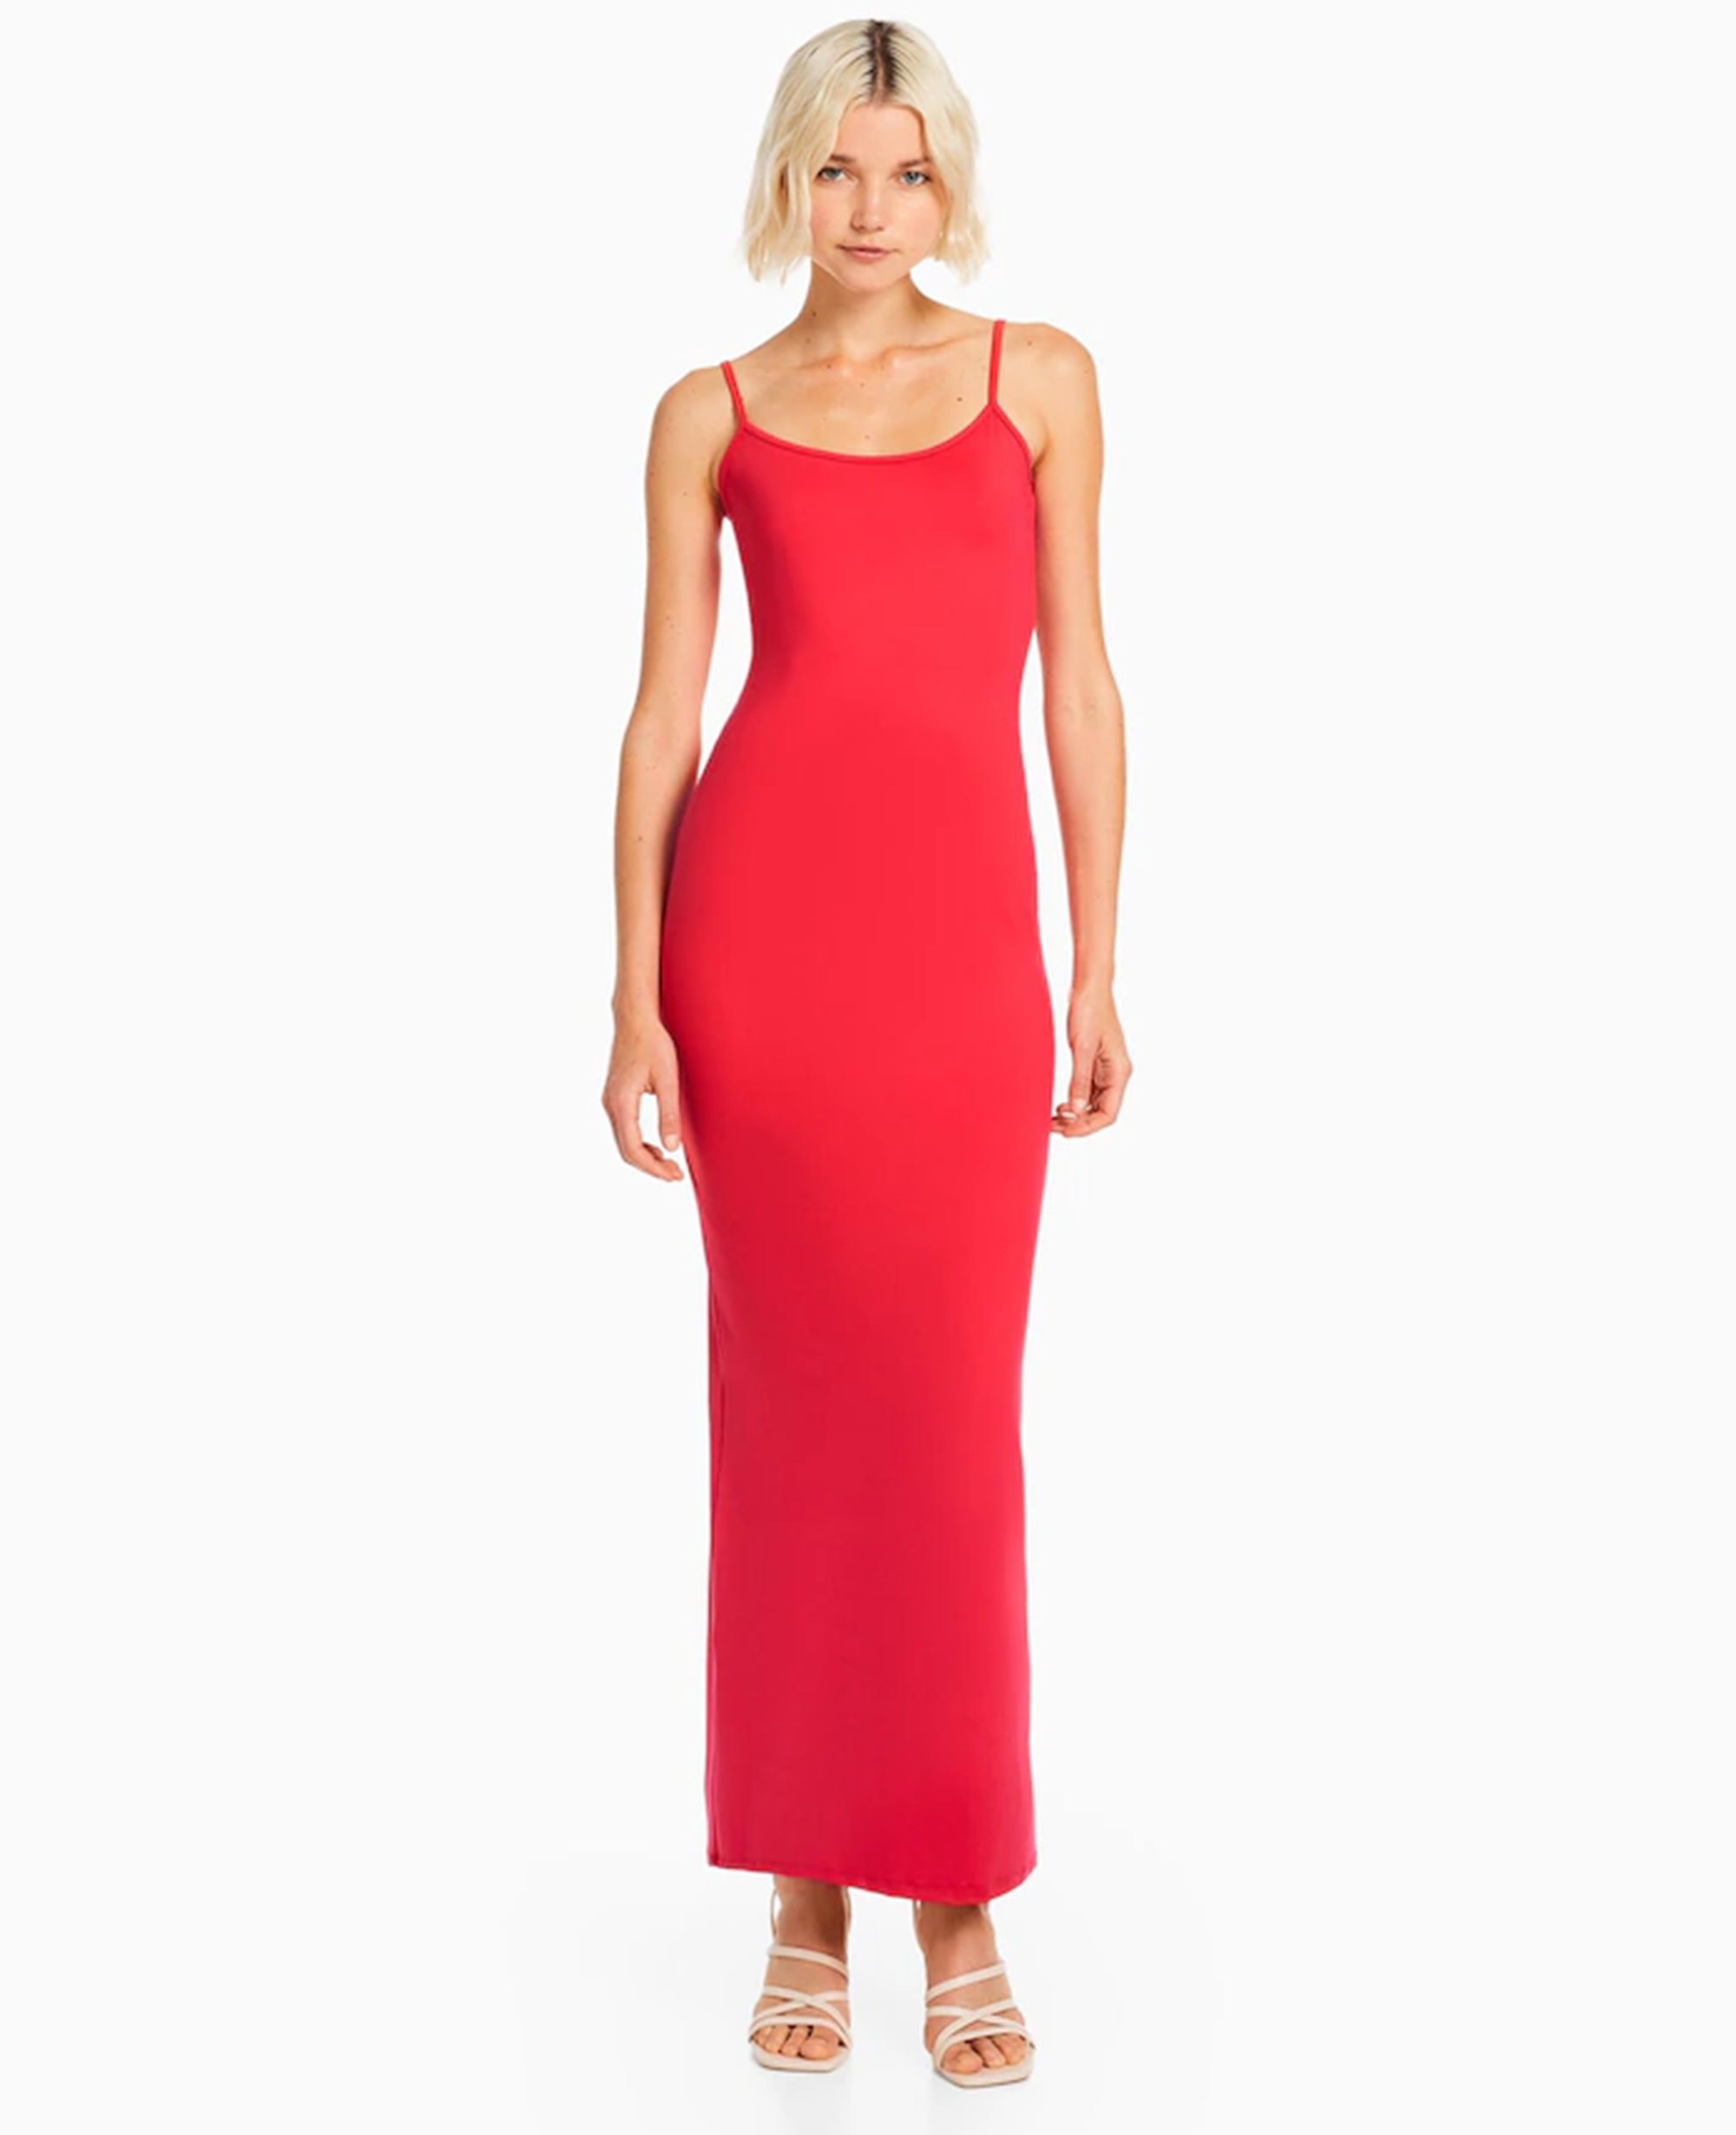 These Skim Dresses Dupes Are So Good, You'll Do a Double-Take